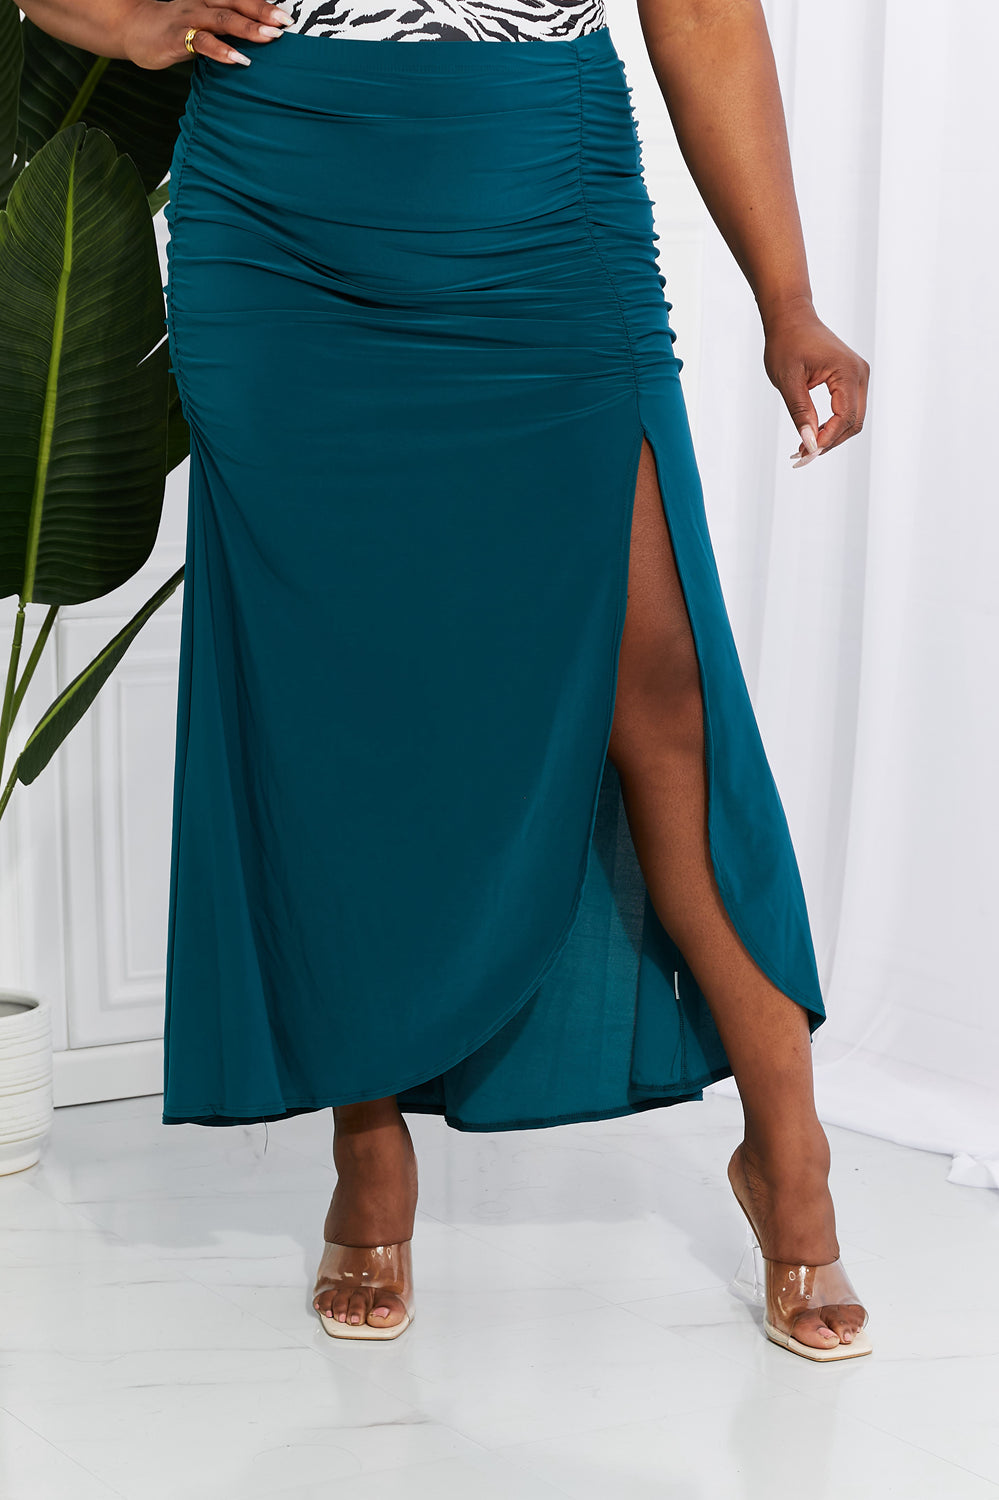 White Birch Up and Up Ruched Slit Maxi Skirt in Teal White Birch